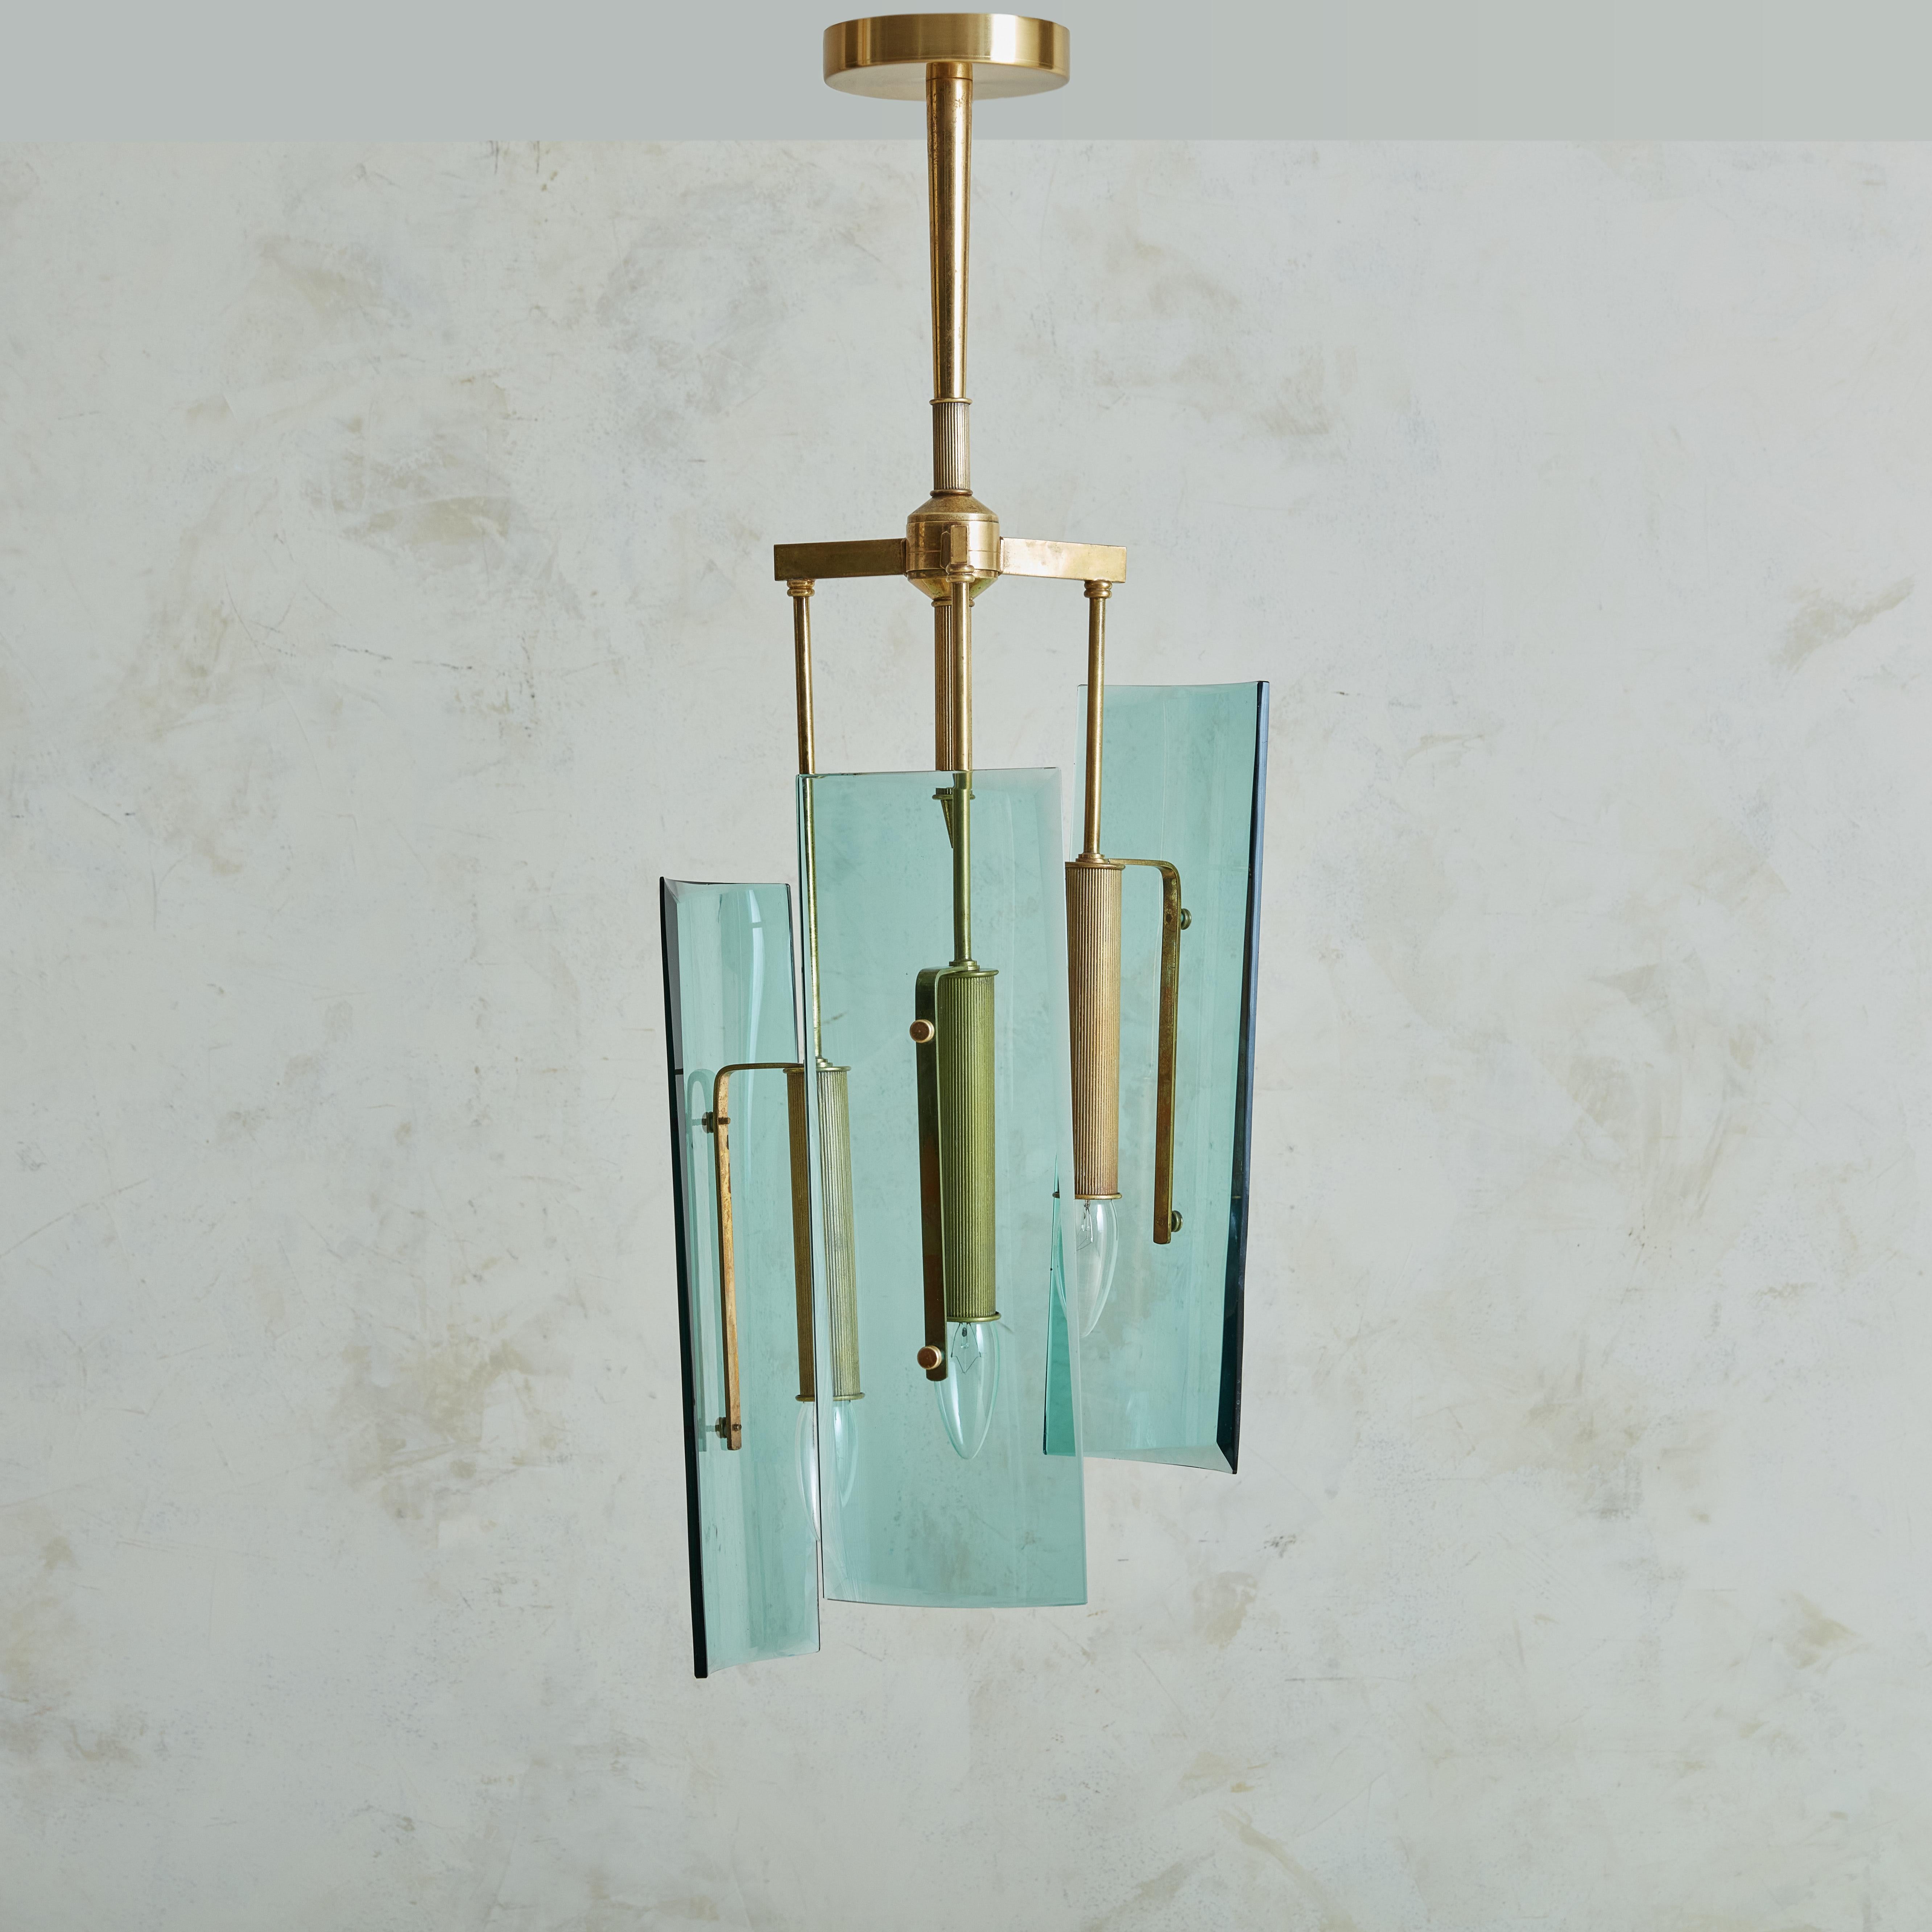 Beautiful Max Ingrand for Fontana Arte style Pendant with brass structure and stunning curved light blue tinted glass shades. The three arms, positioning the light bulbs on different heights diffuse the light in opposite directions creating a bright